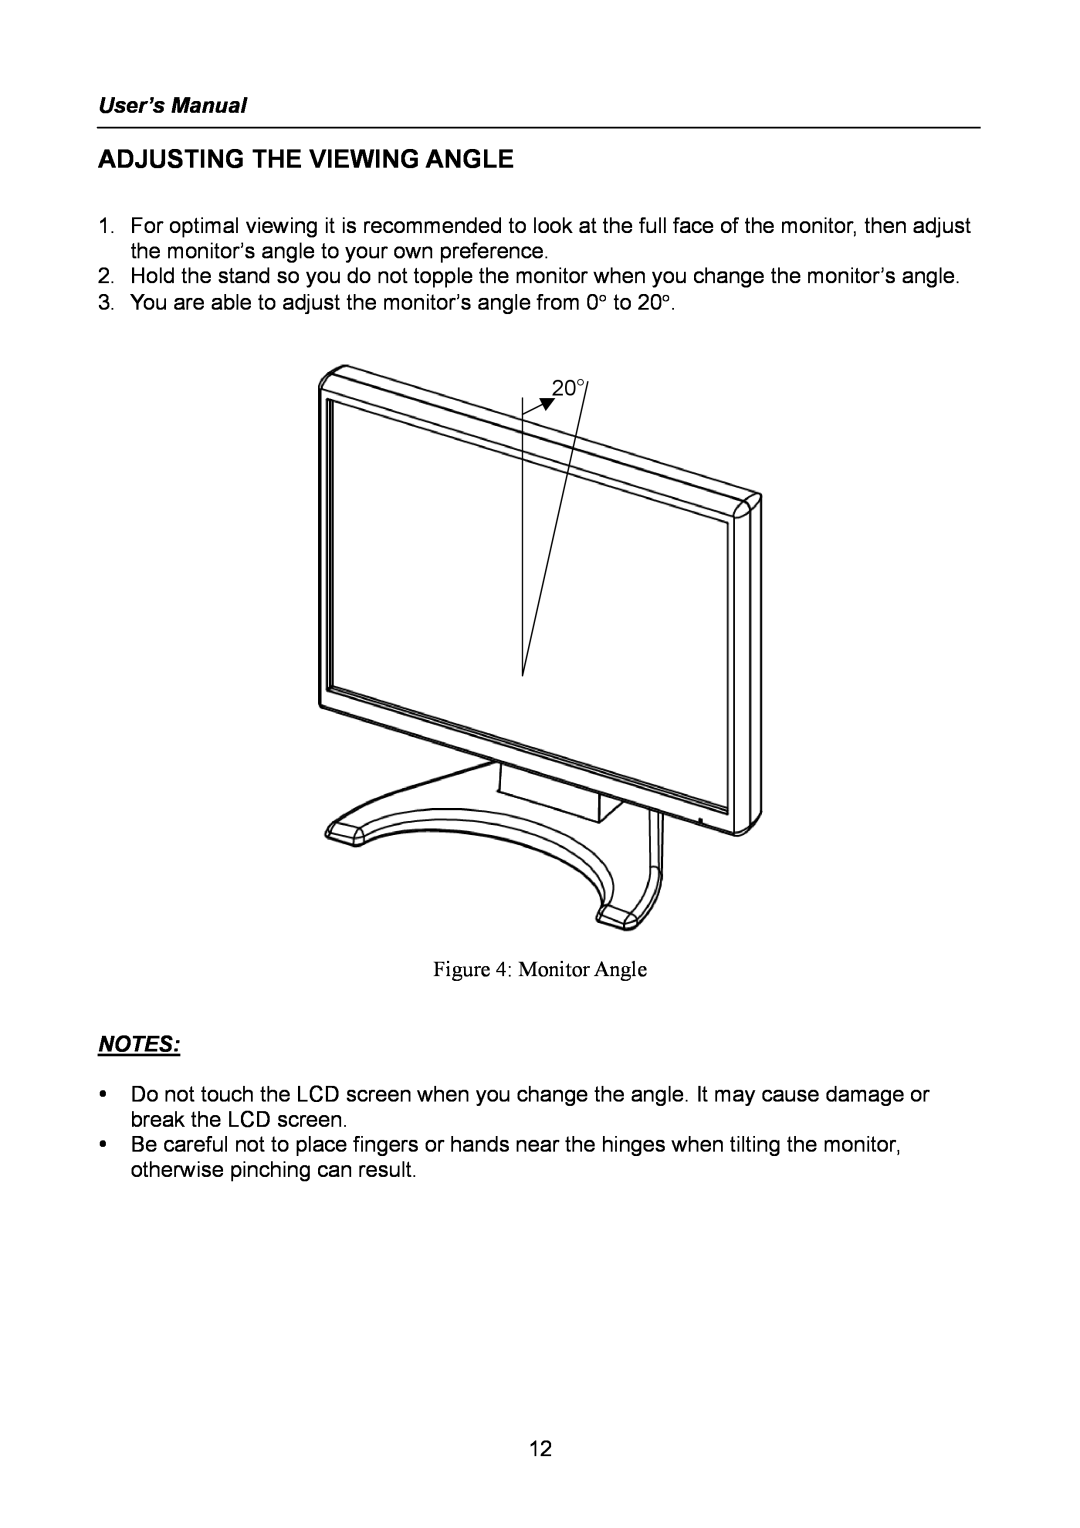 Hanns.G HW223, HW222 user manual Adjusting The Viewing Angle 